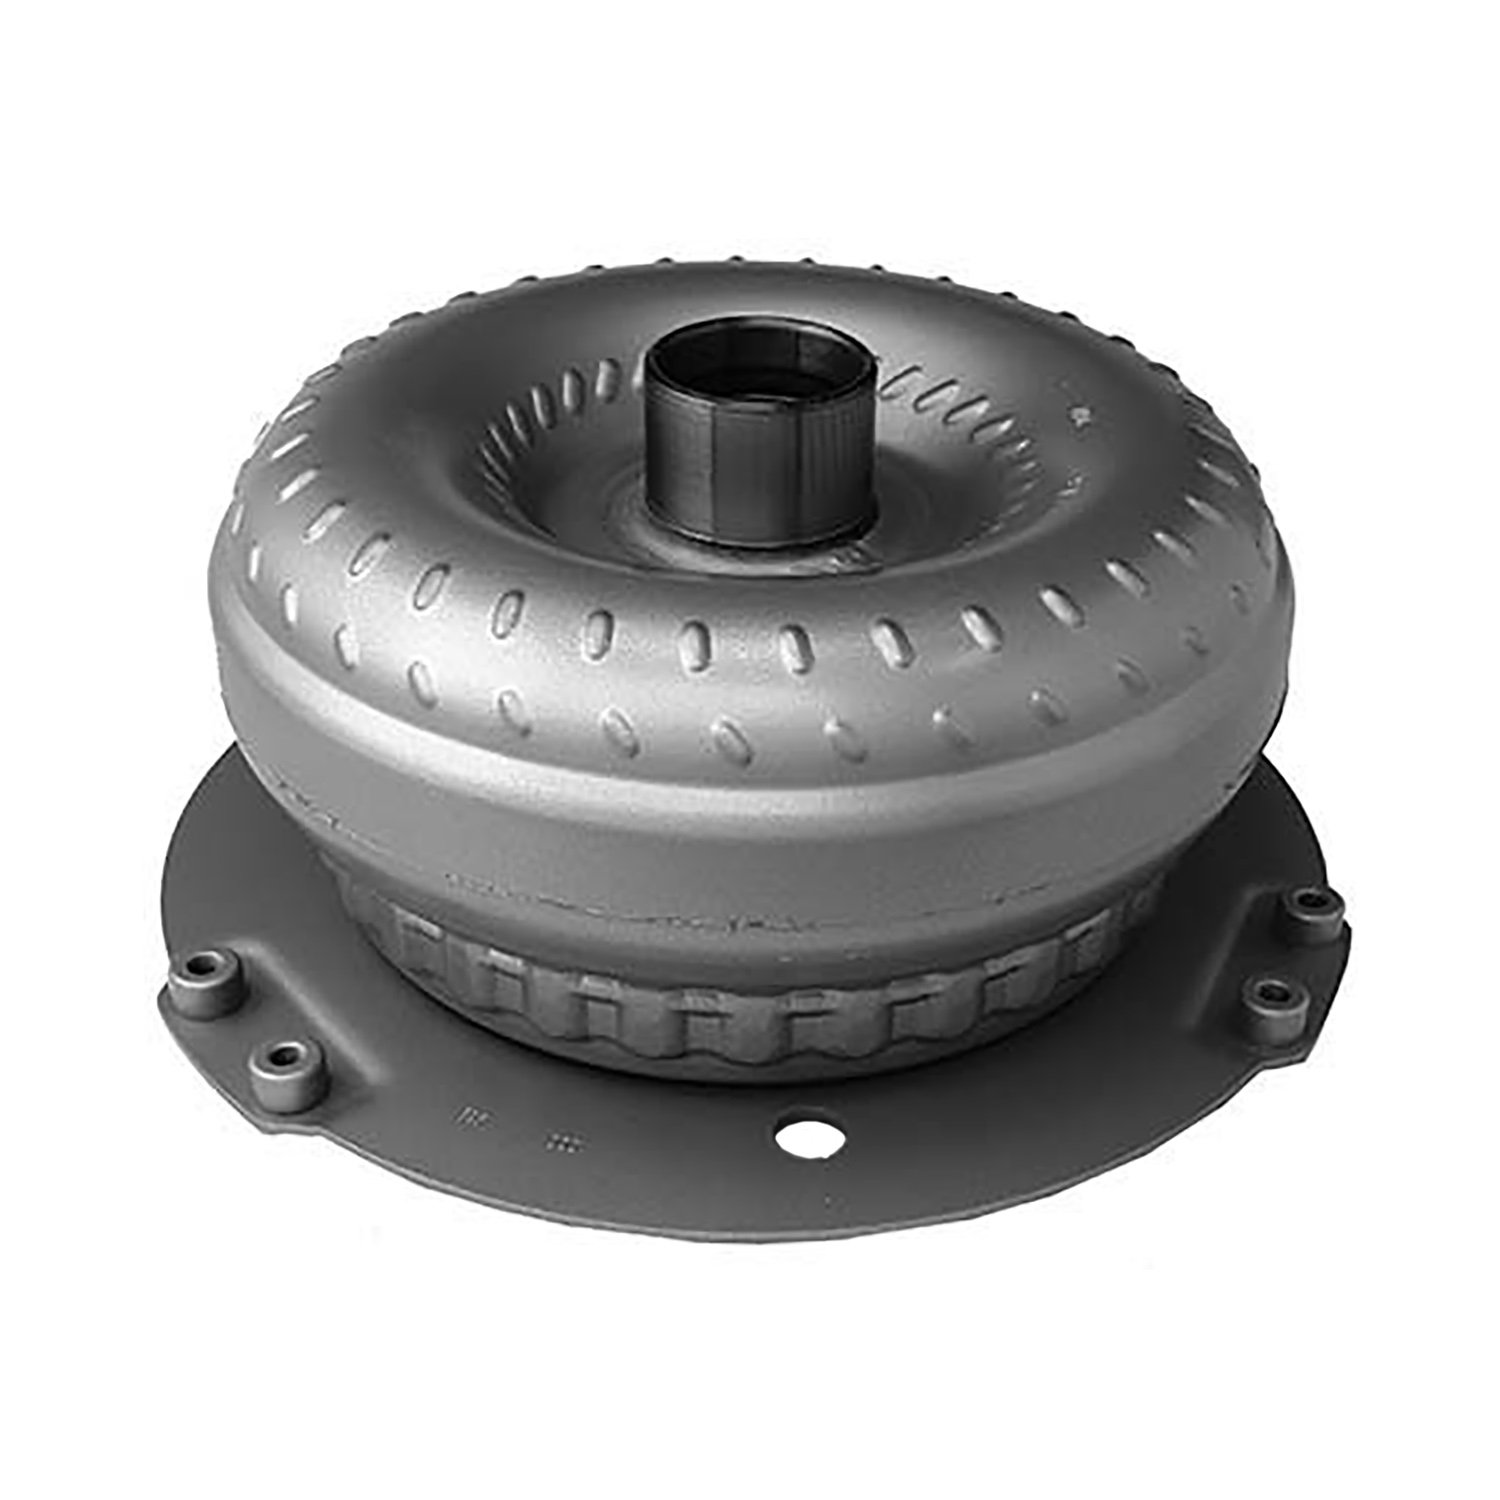 Remanufactured Automatic Transmission Torque Converter for Chrysler 8HP45/845RE 12-18